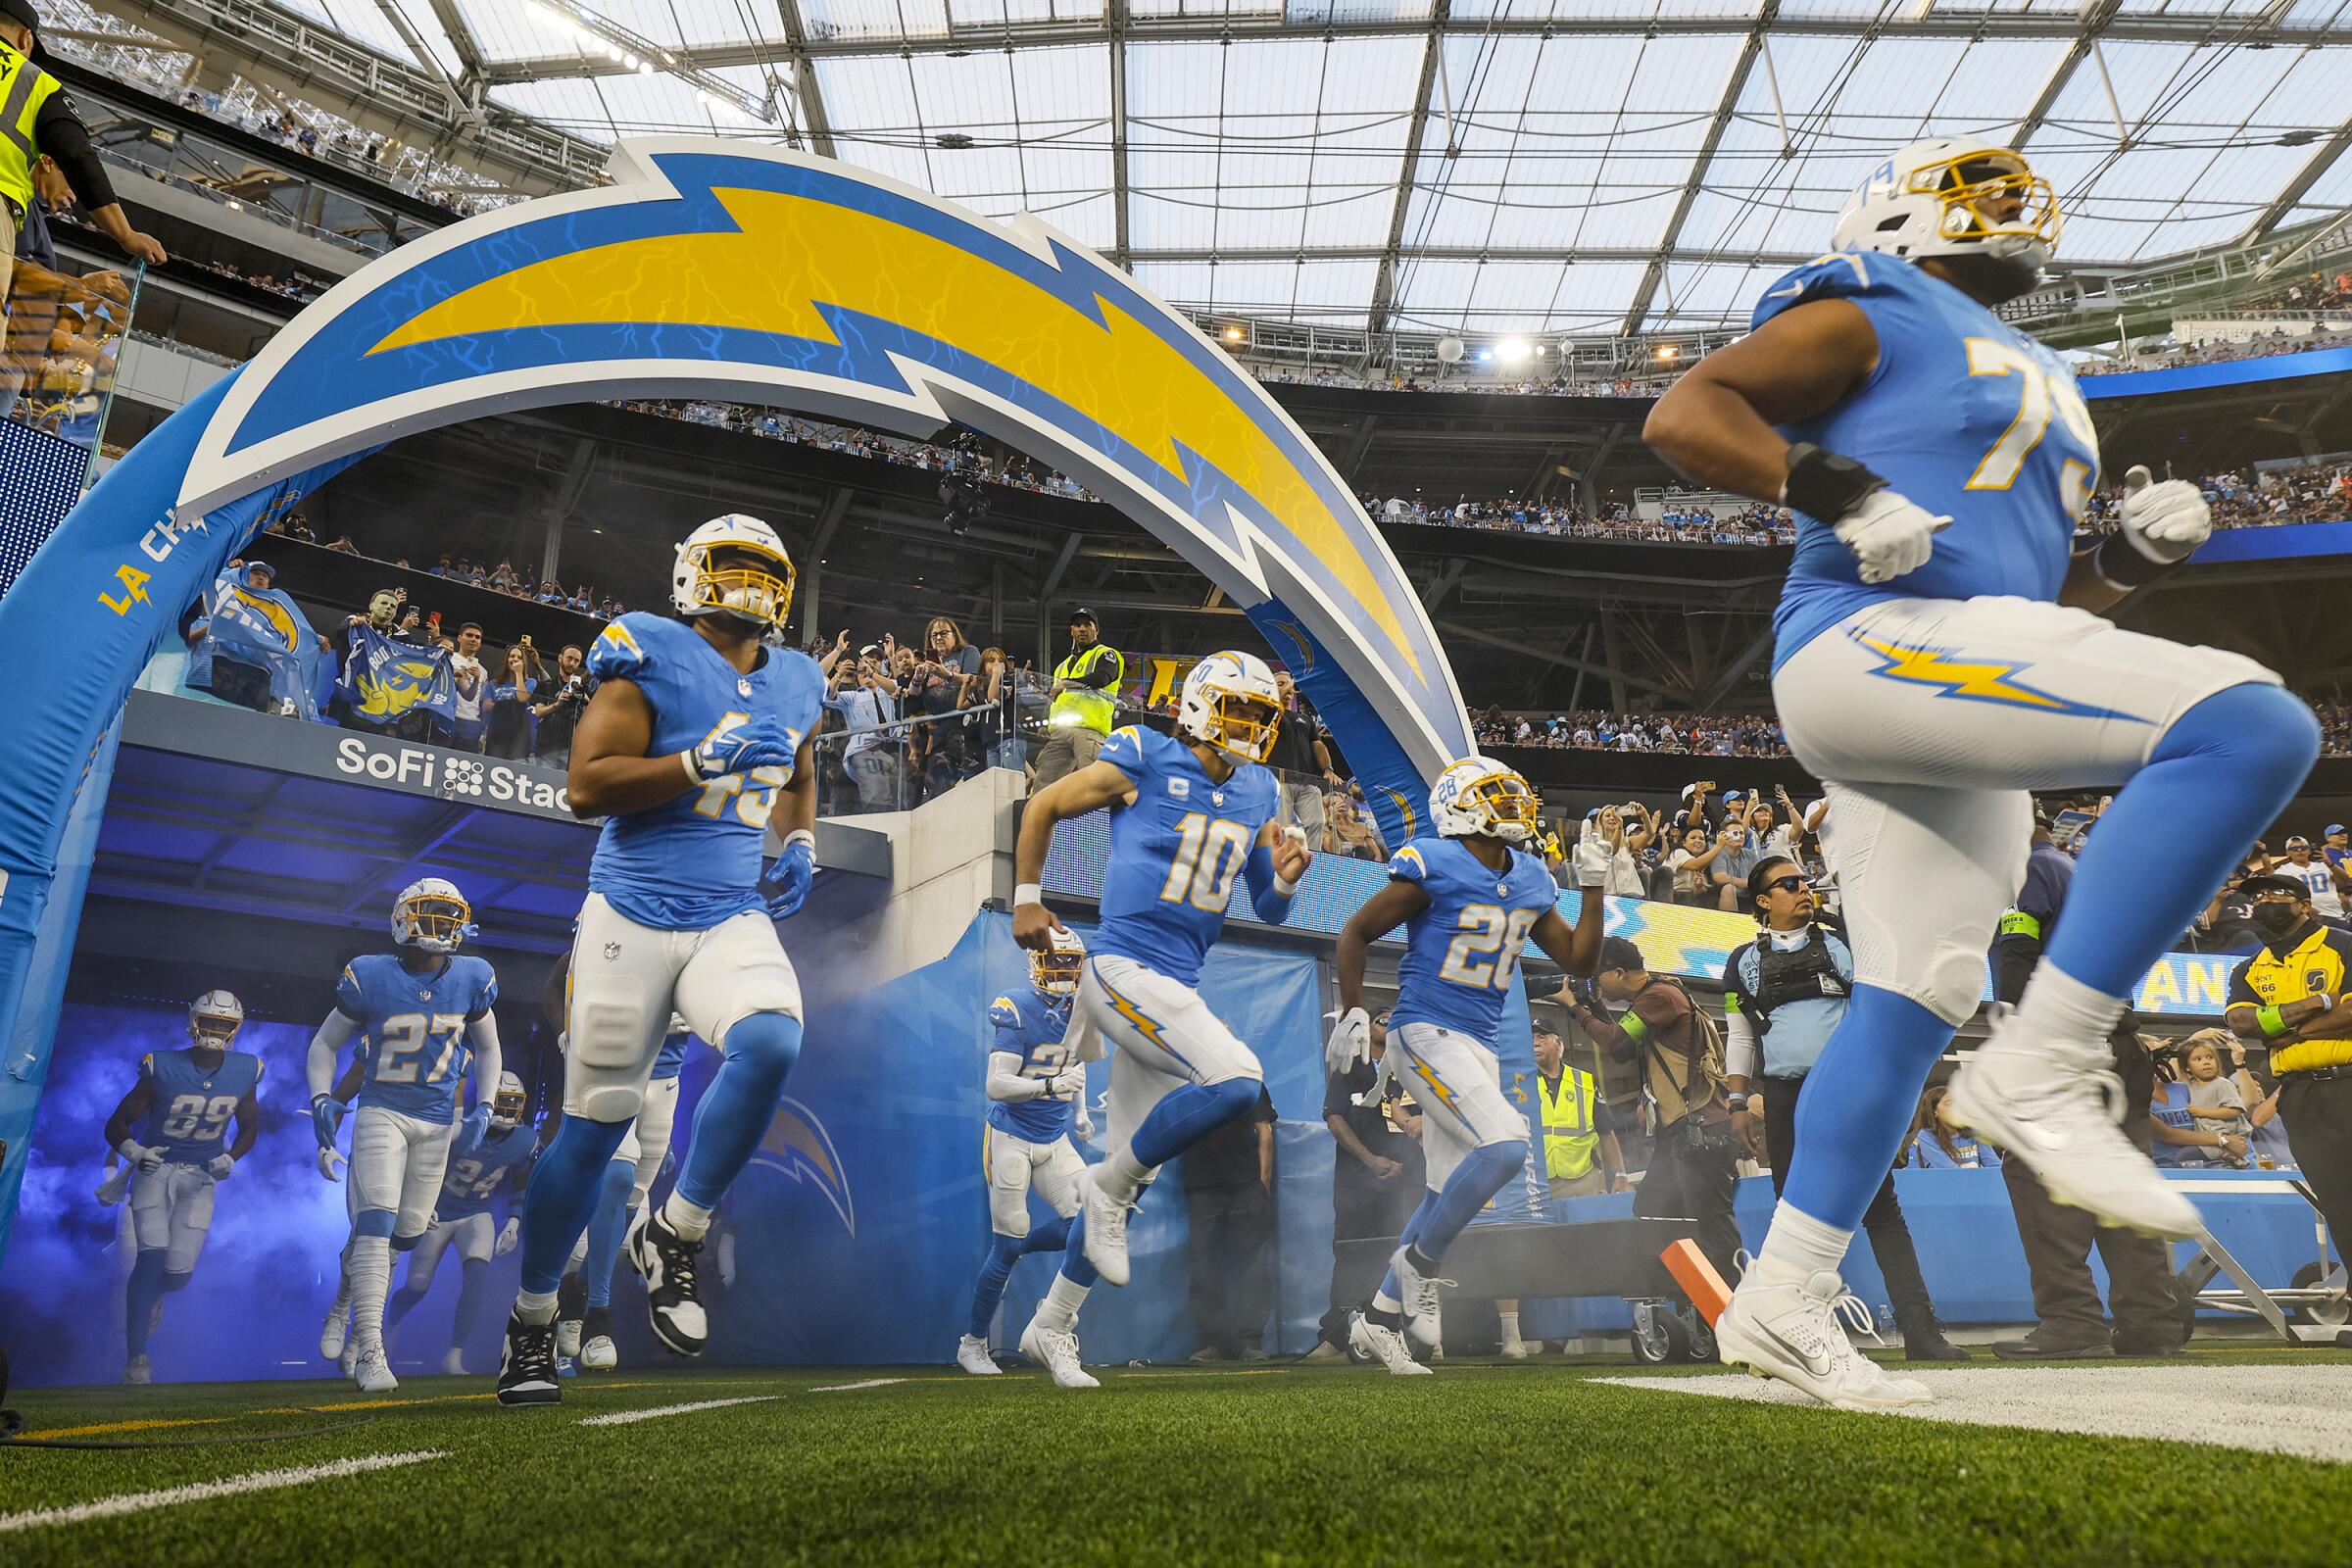  Chargers Game : A thrilling showdown between two NBA powerhouses